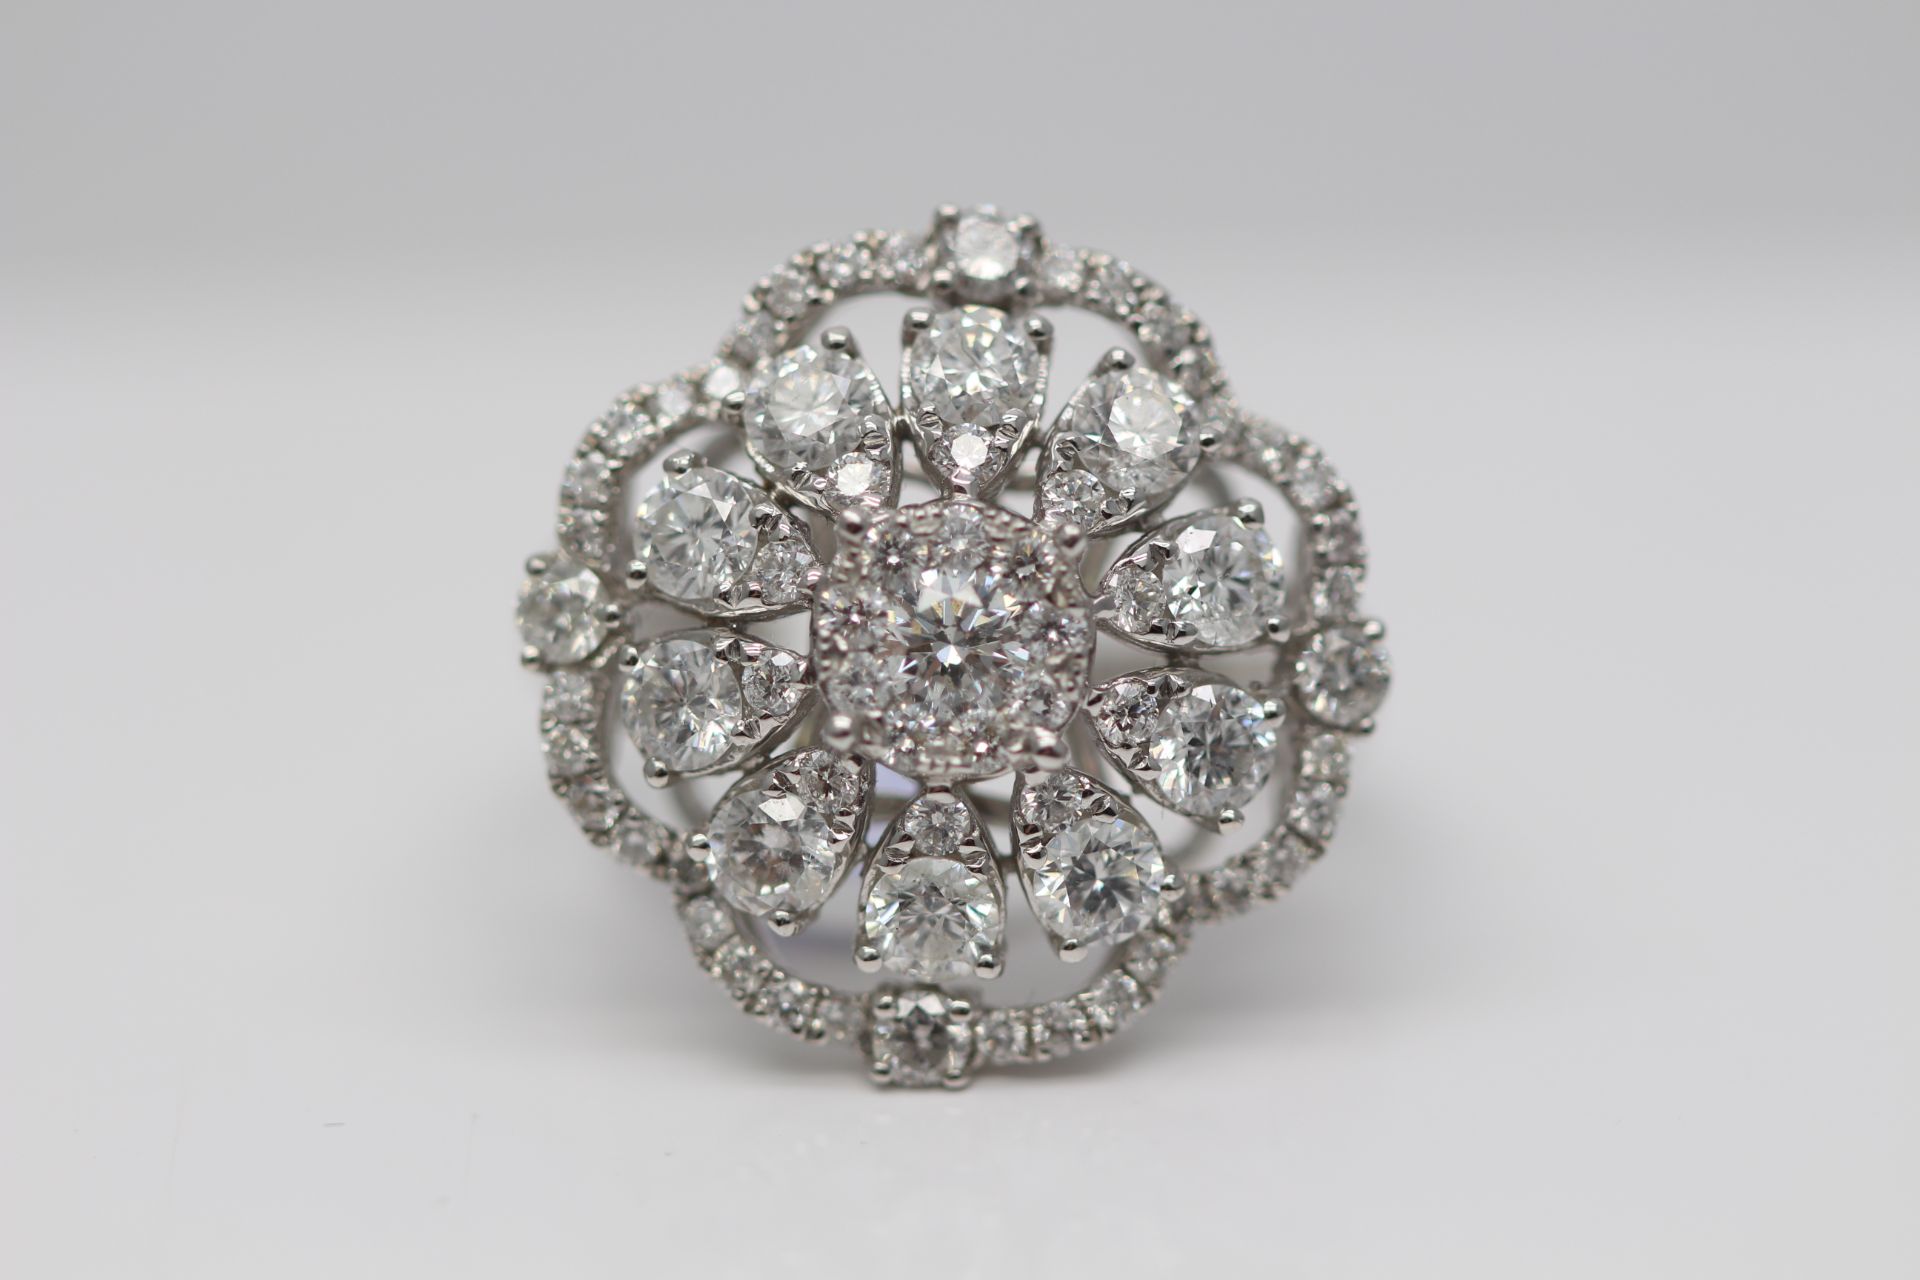 18CT WHITE GOLD LADIES DIAMOND CLUSTER RING, SET WITH 2.25 CARATS OF DIMAONDS